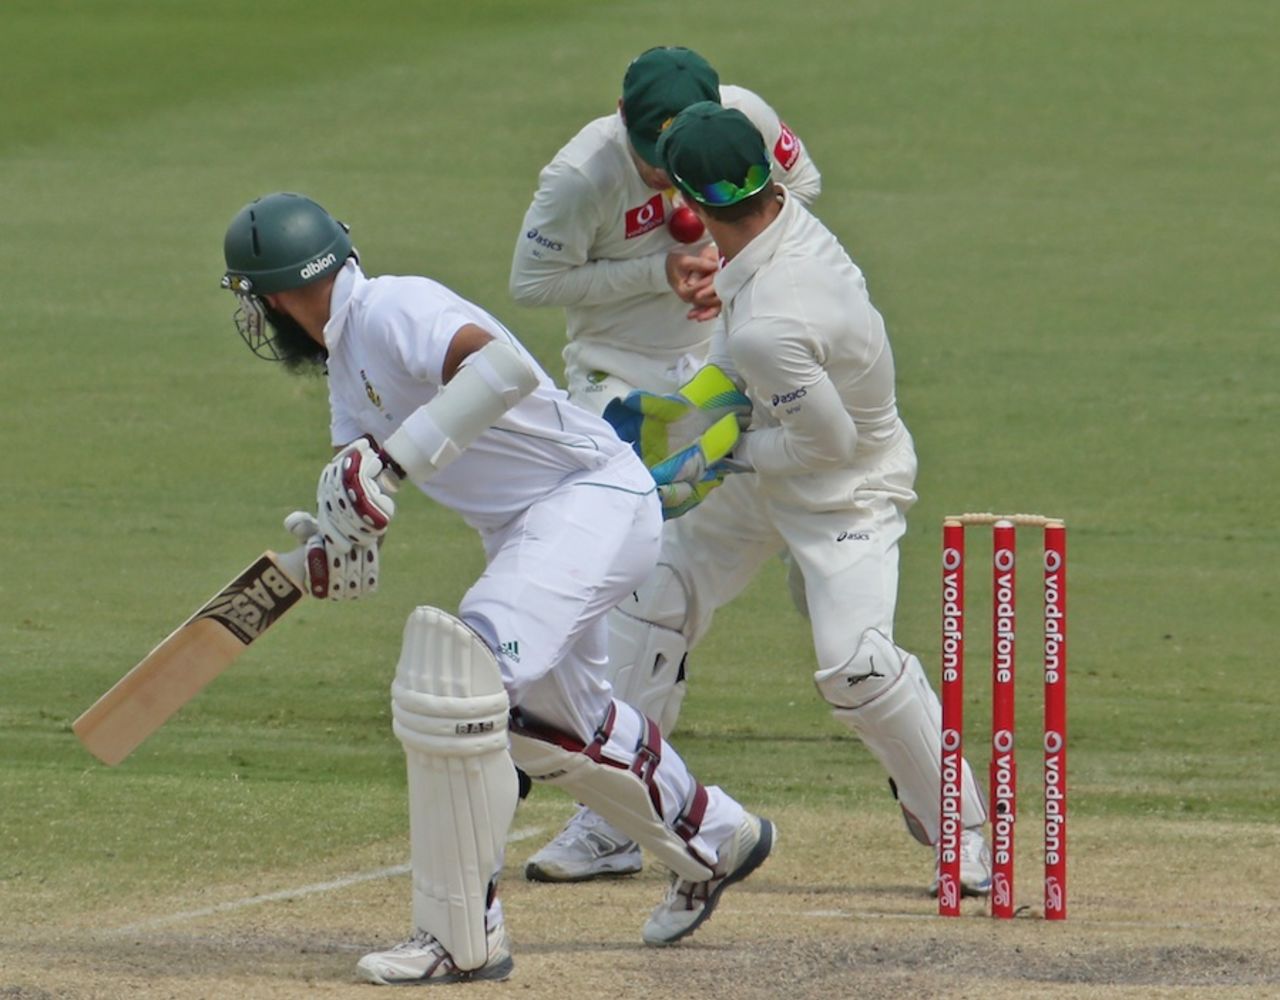 Hashim Amla was caught at slip after a juggle from Michael Clarke, Australia v South Africa, 2nd Test, Adelaide, 4th day, November 25, 2012